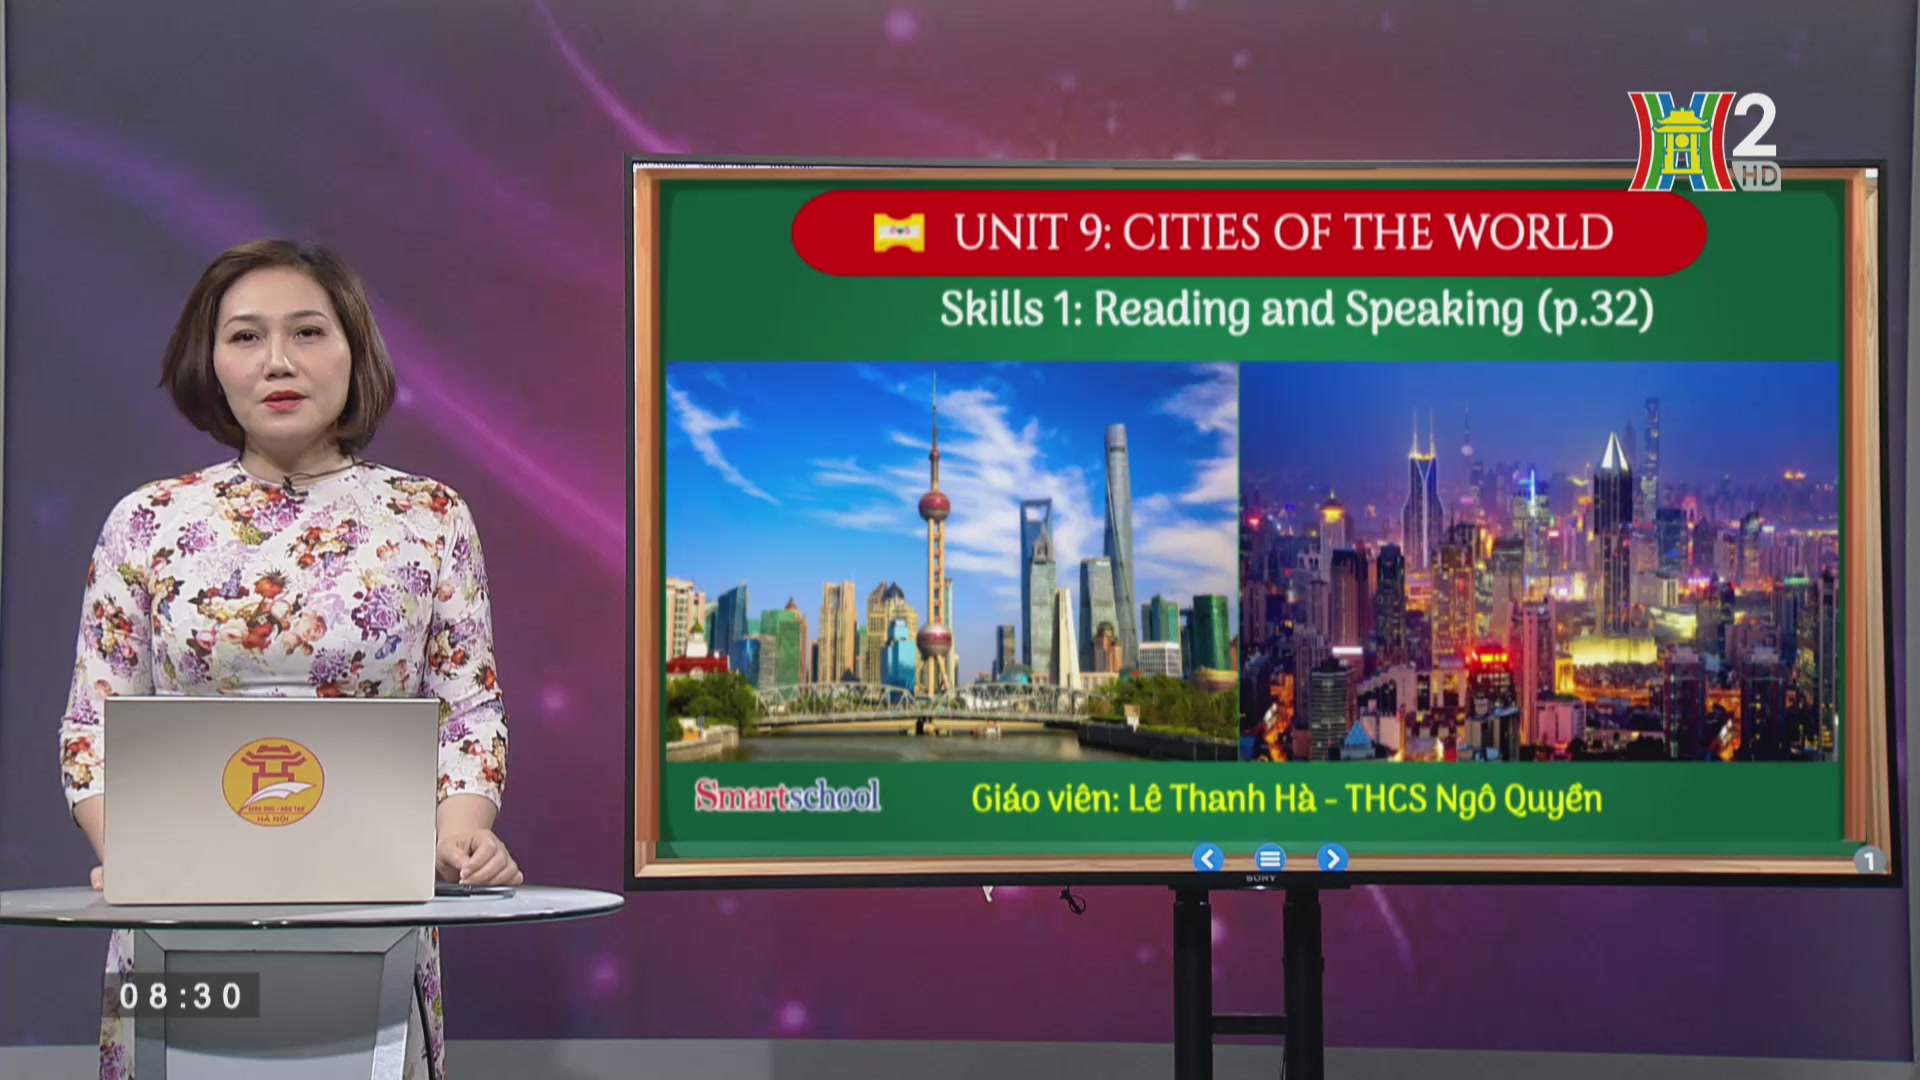 Tiếng Anh lớp 6: Unit 9 - CITIES OF THE WORLD - Skills 1 (8h30 ngày 16/4/2020)